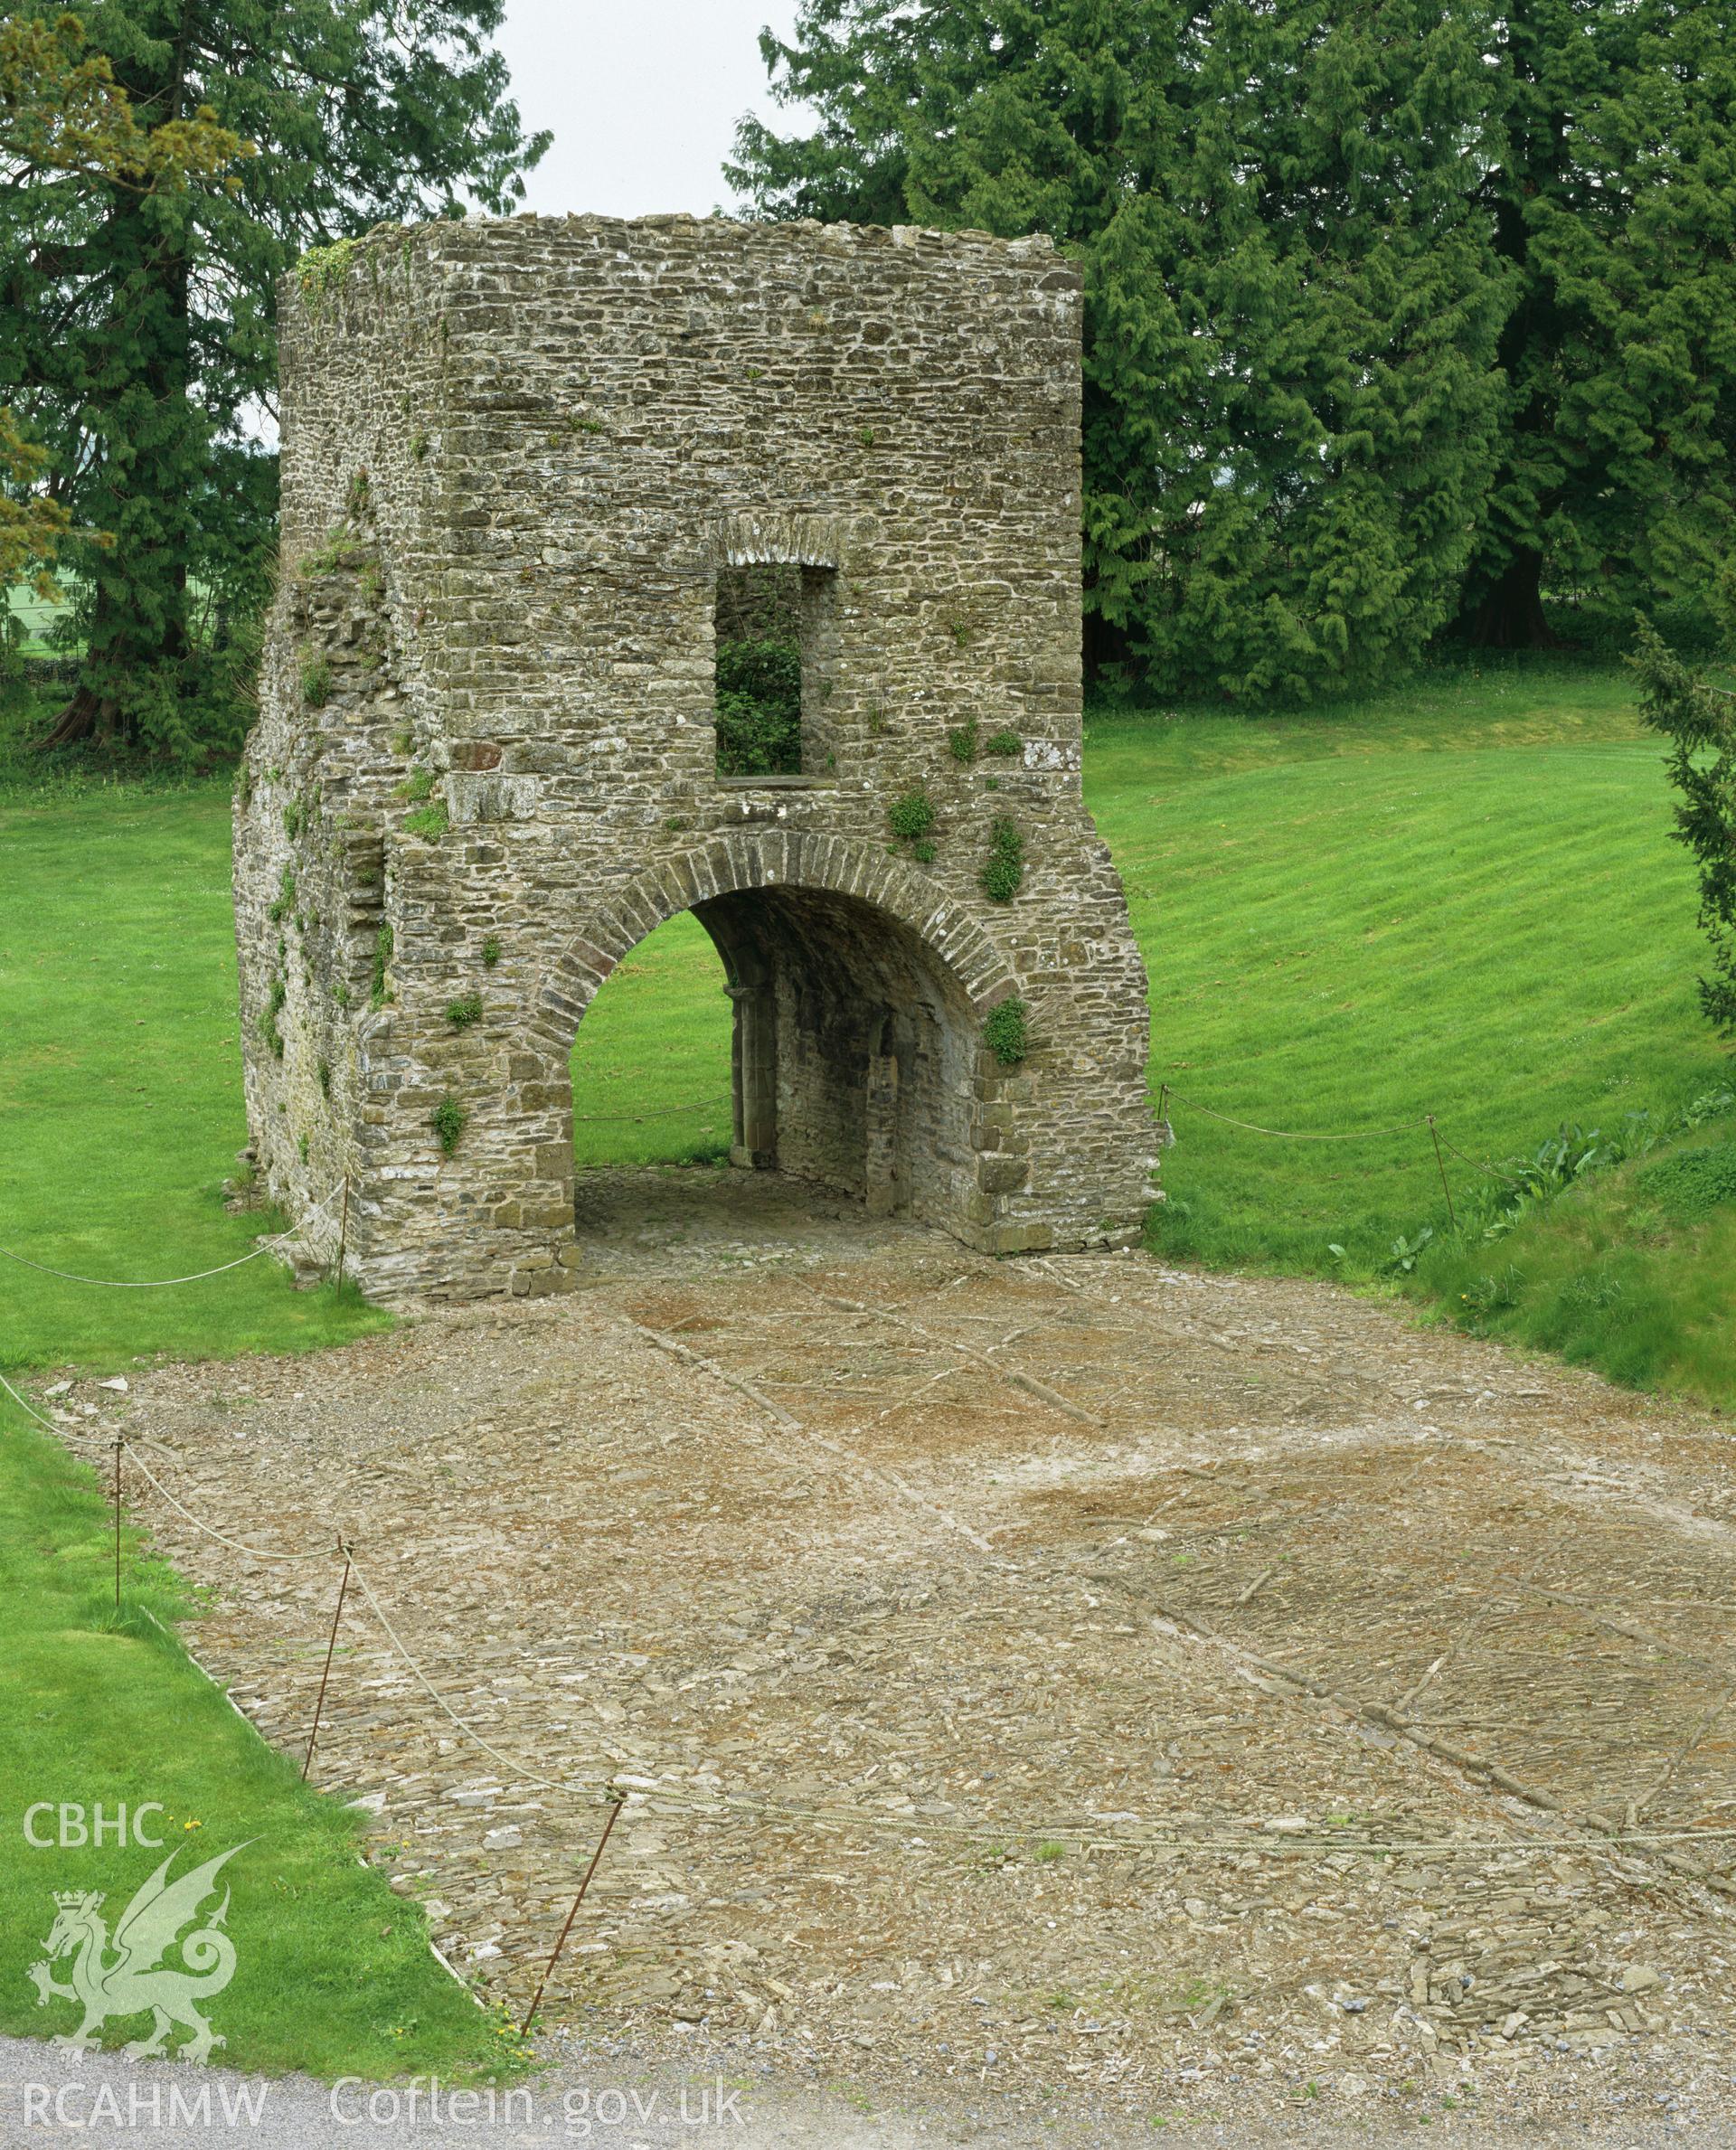 Colour transparency showing the gatehouse at Aberglasney, produced by Iain Wright, June 2004